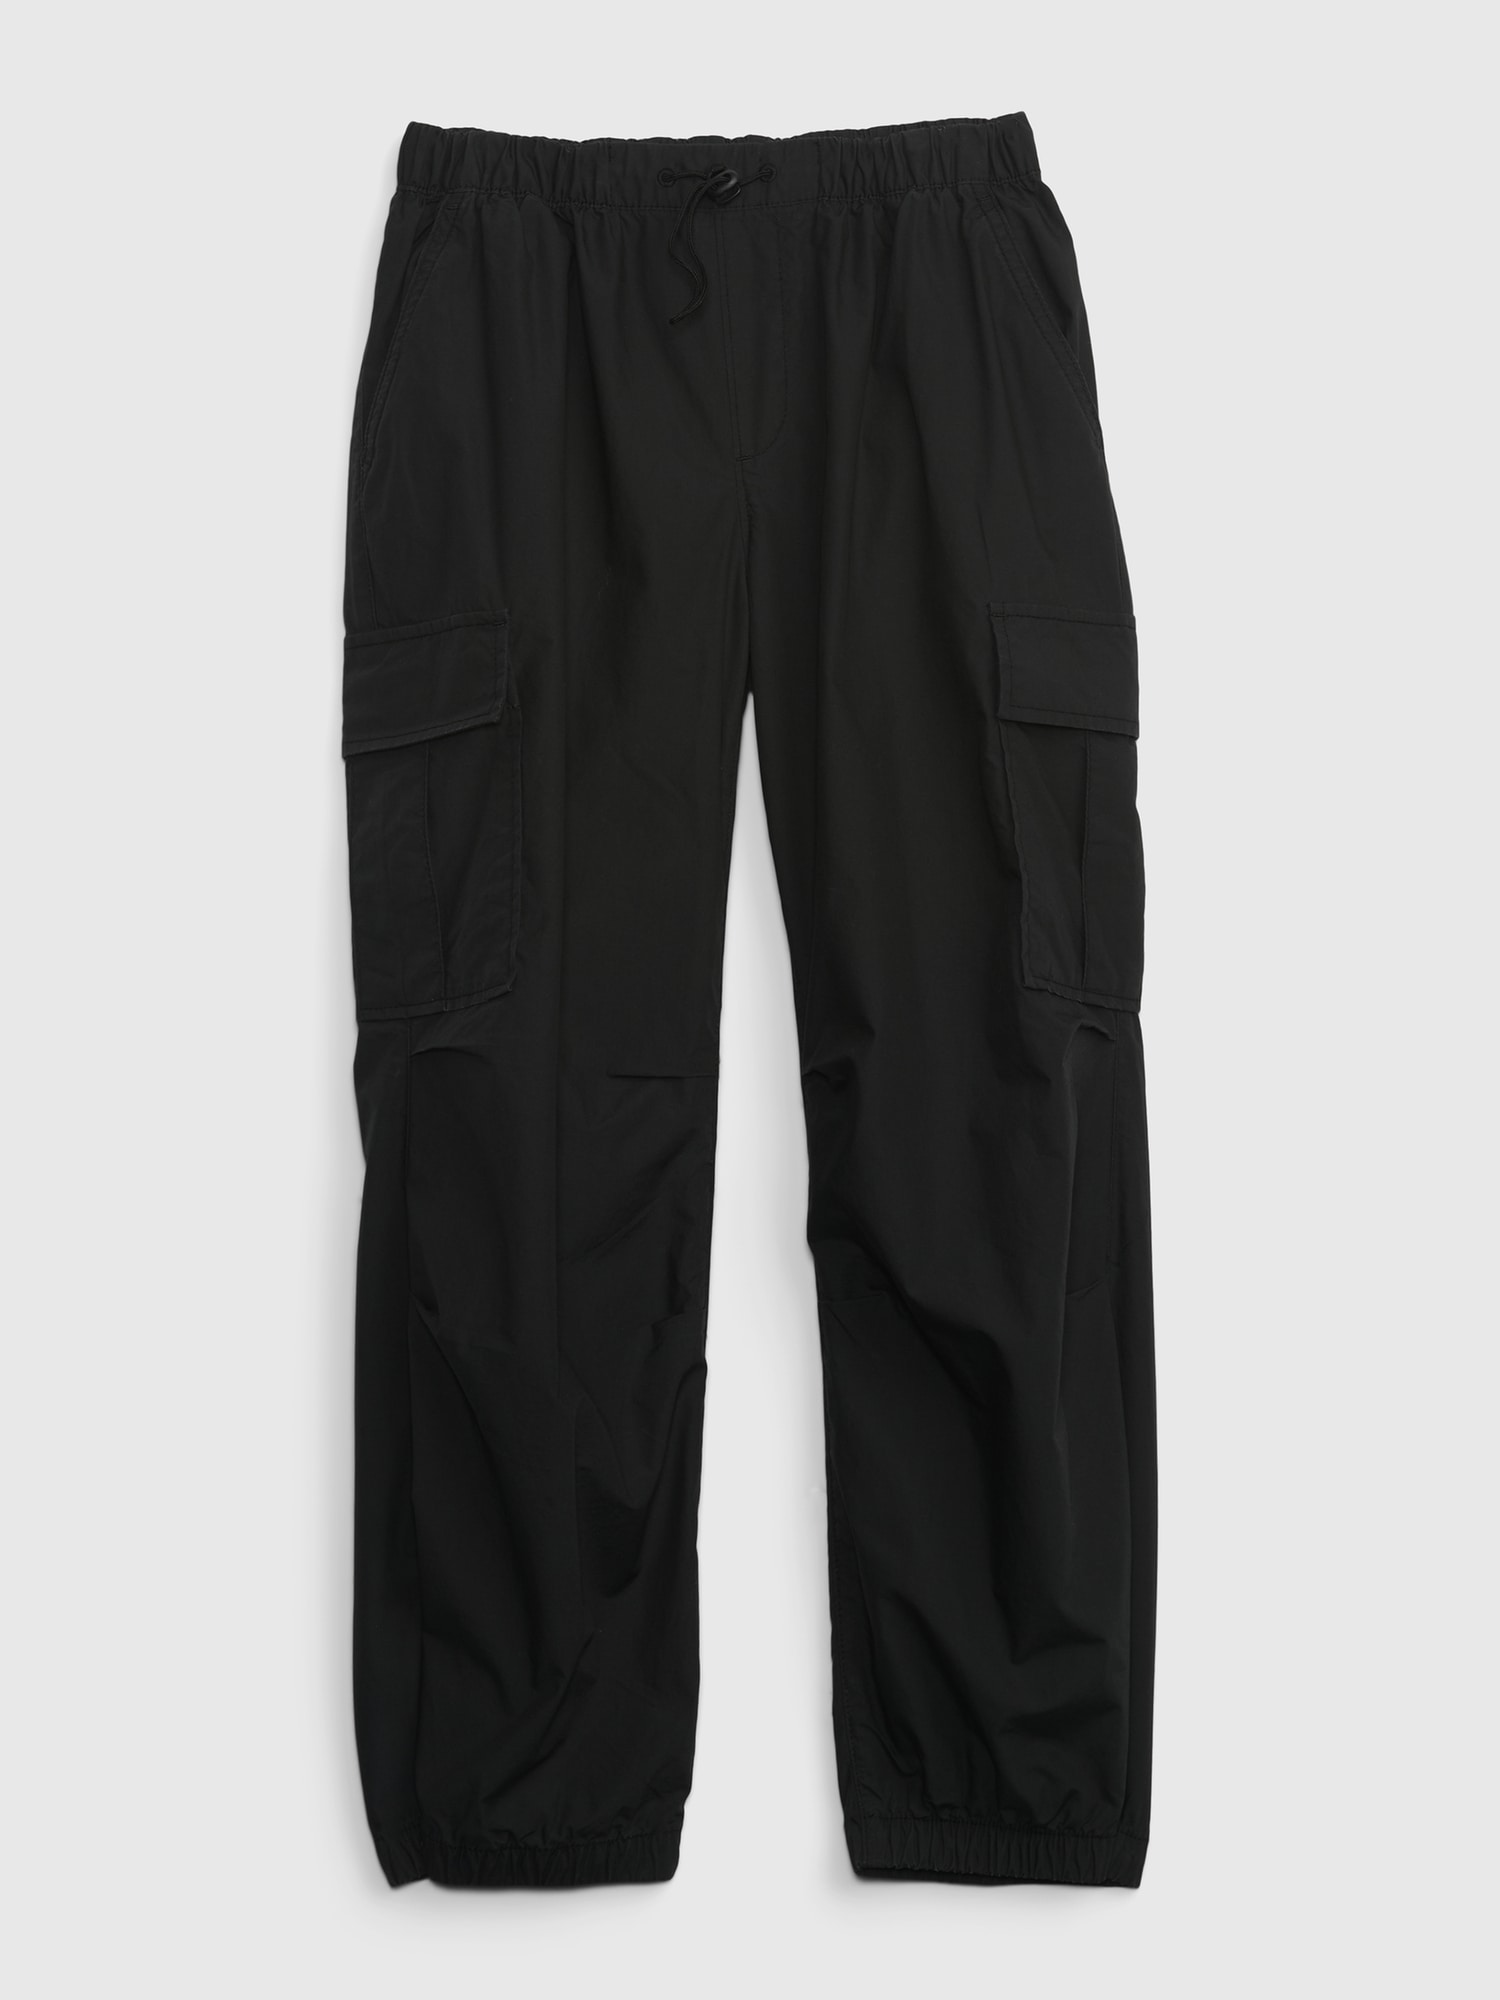 Kids Pull-On Cargo Joggers